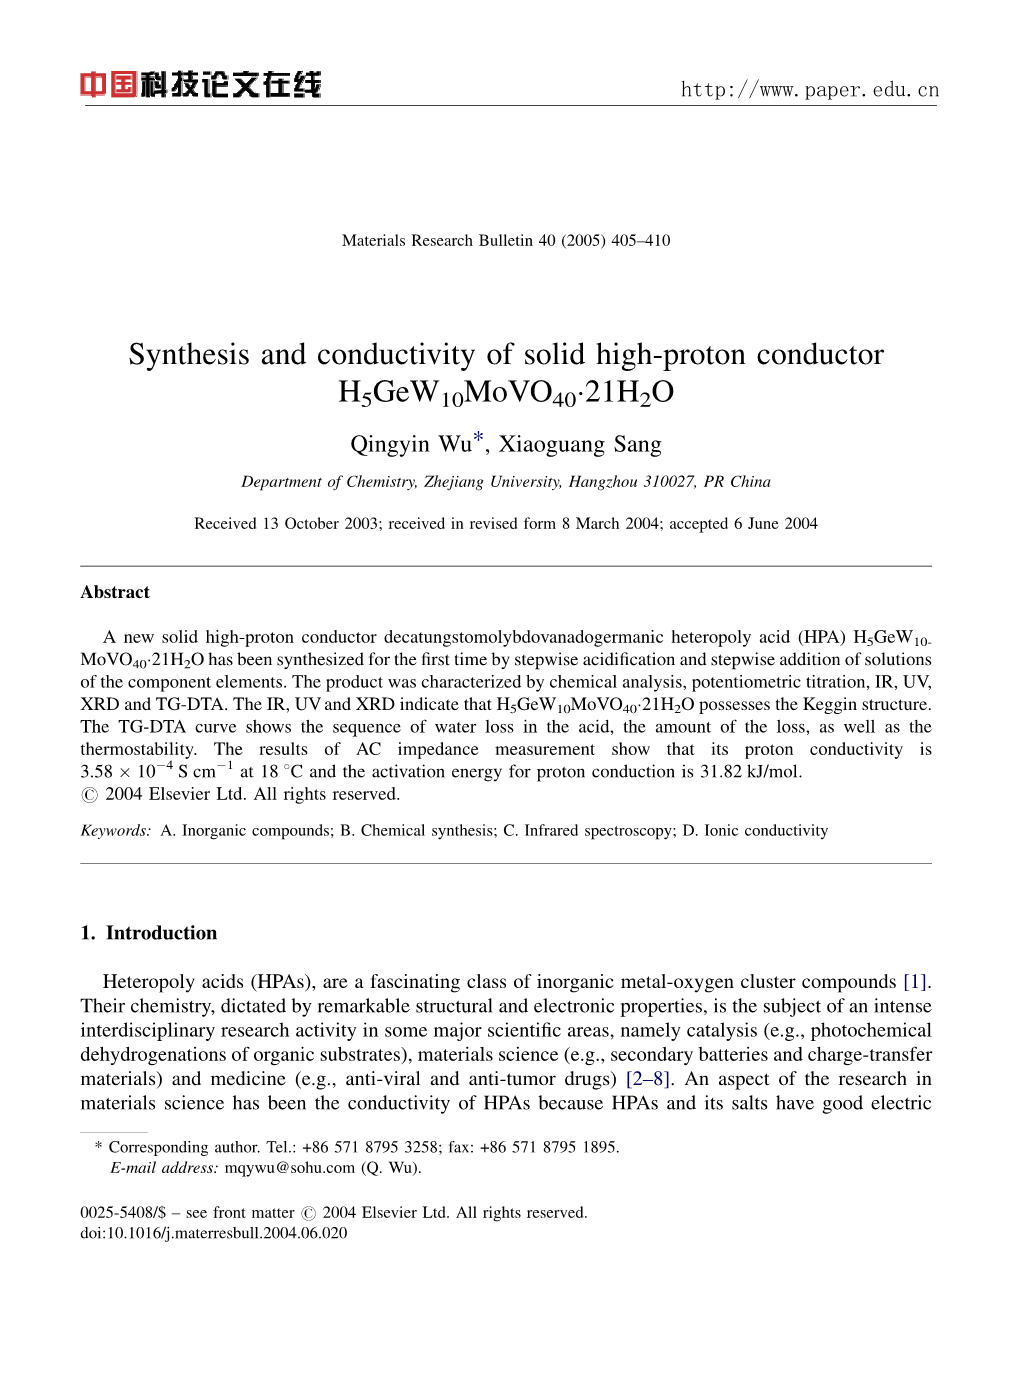 Synthesis and Conductivity of Solid High-Proton Conductor